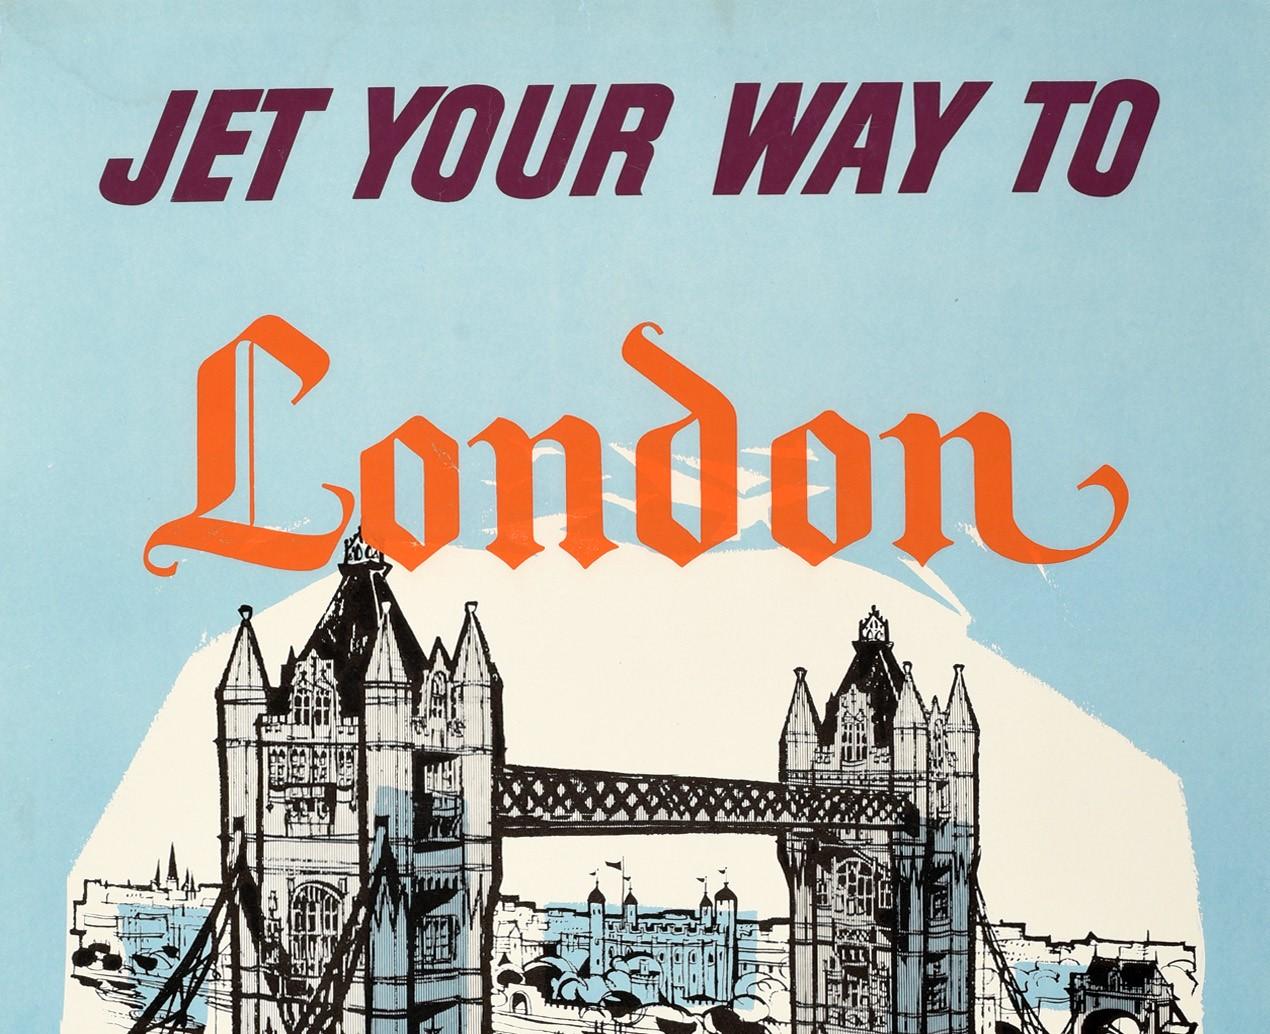 Original Vintage Travel Poster Jet Your Way To London BOAC Tower Bridge Thames - Print by Unknown